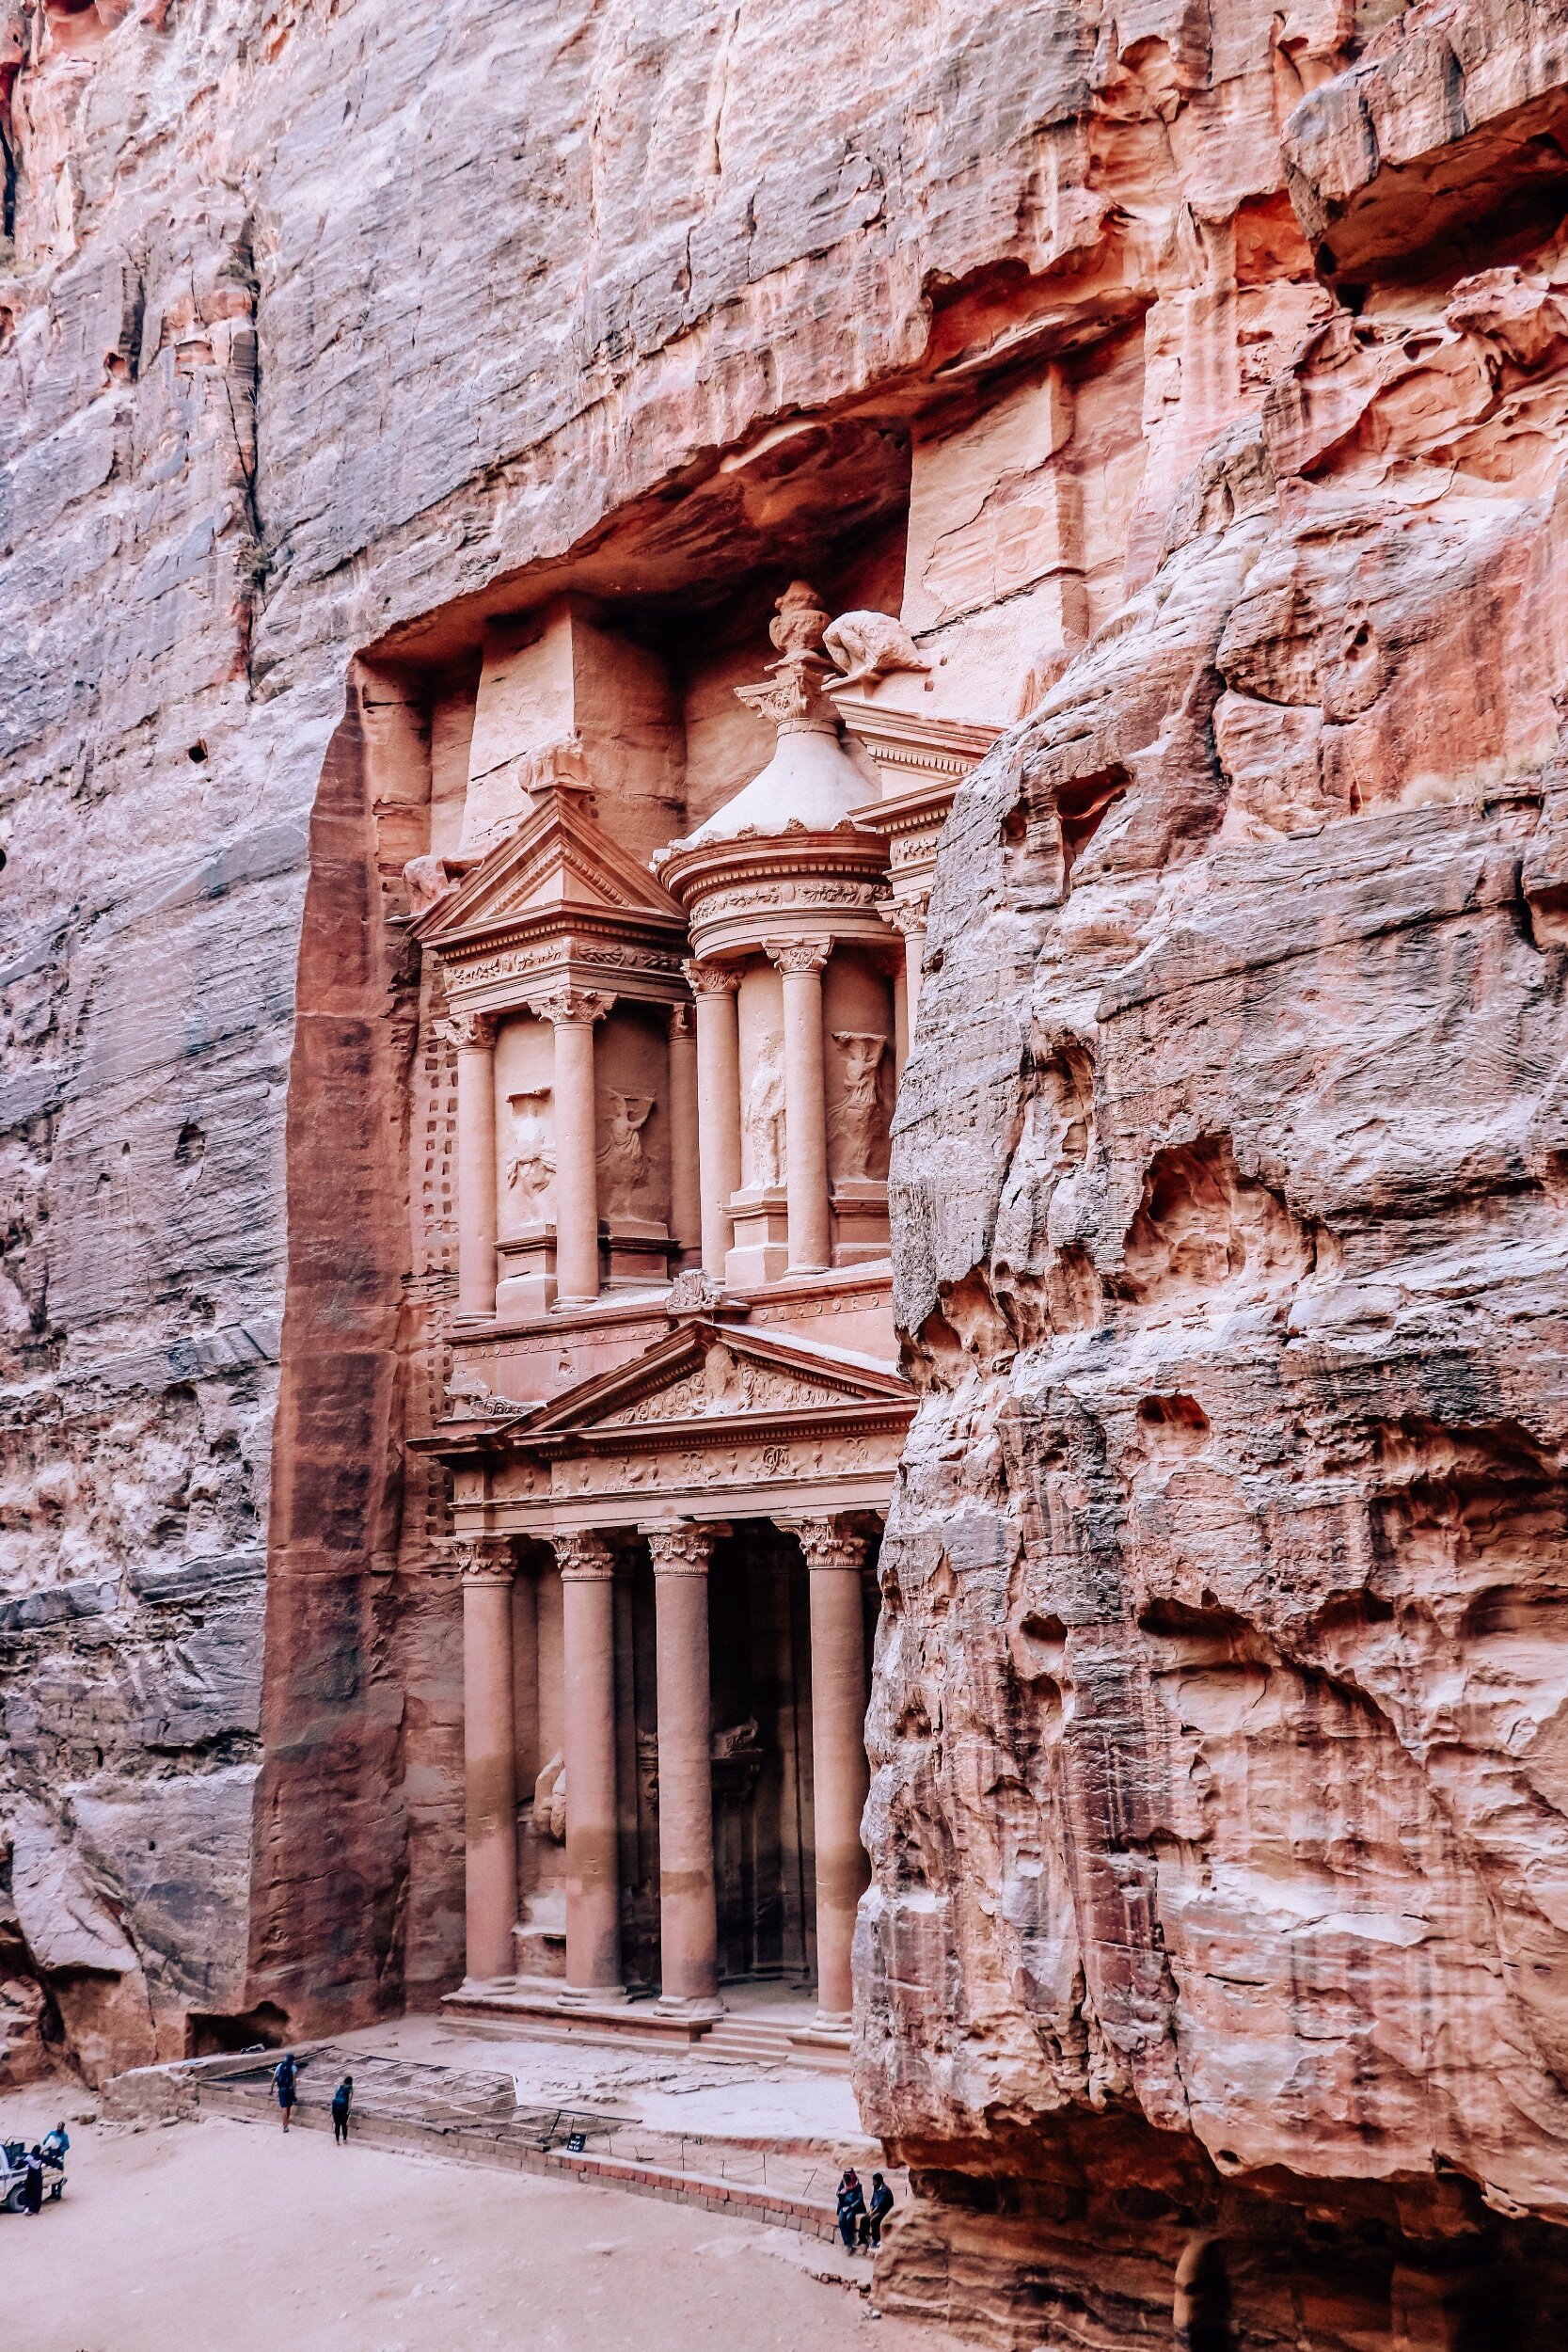 A one week itinerary for Jordan - 